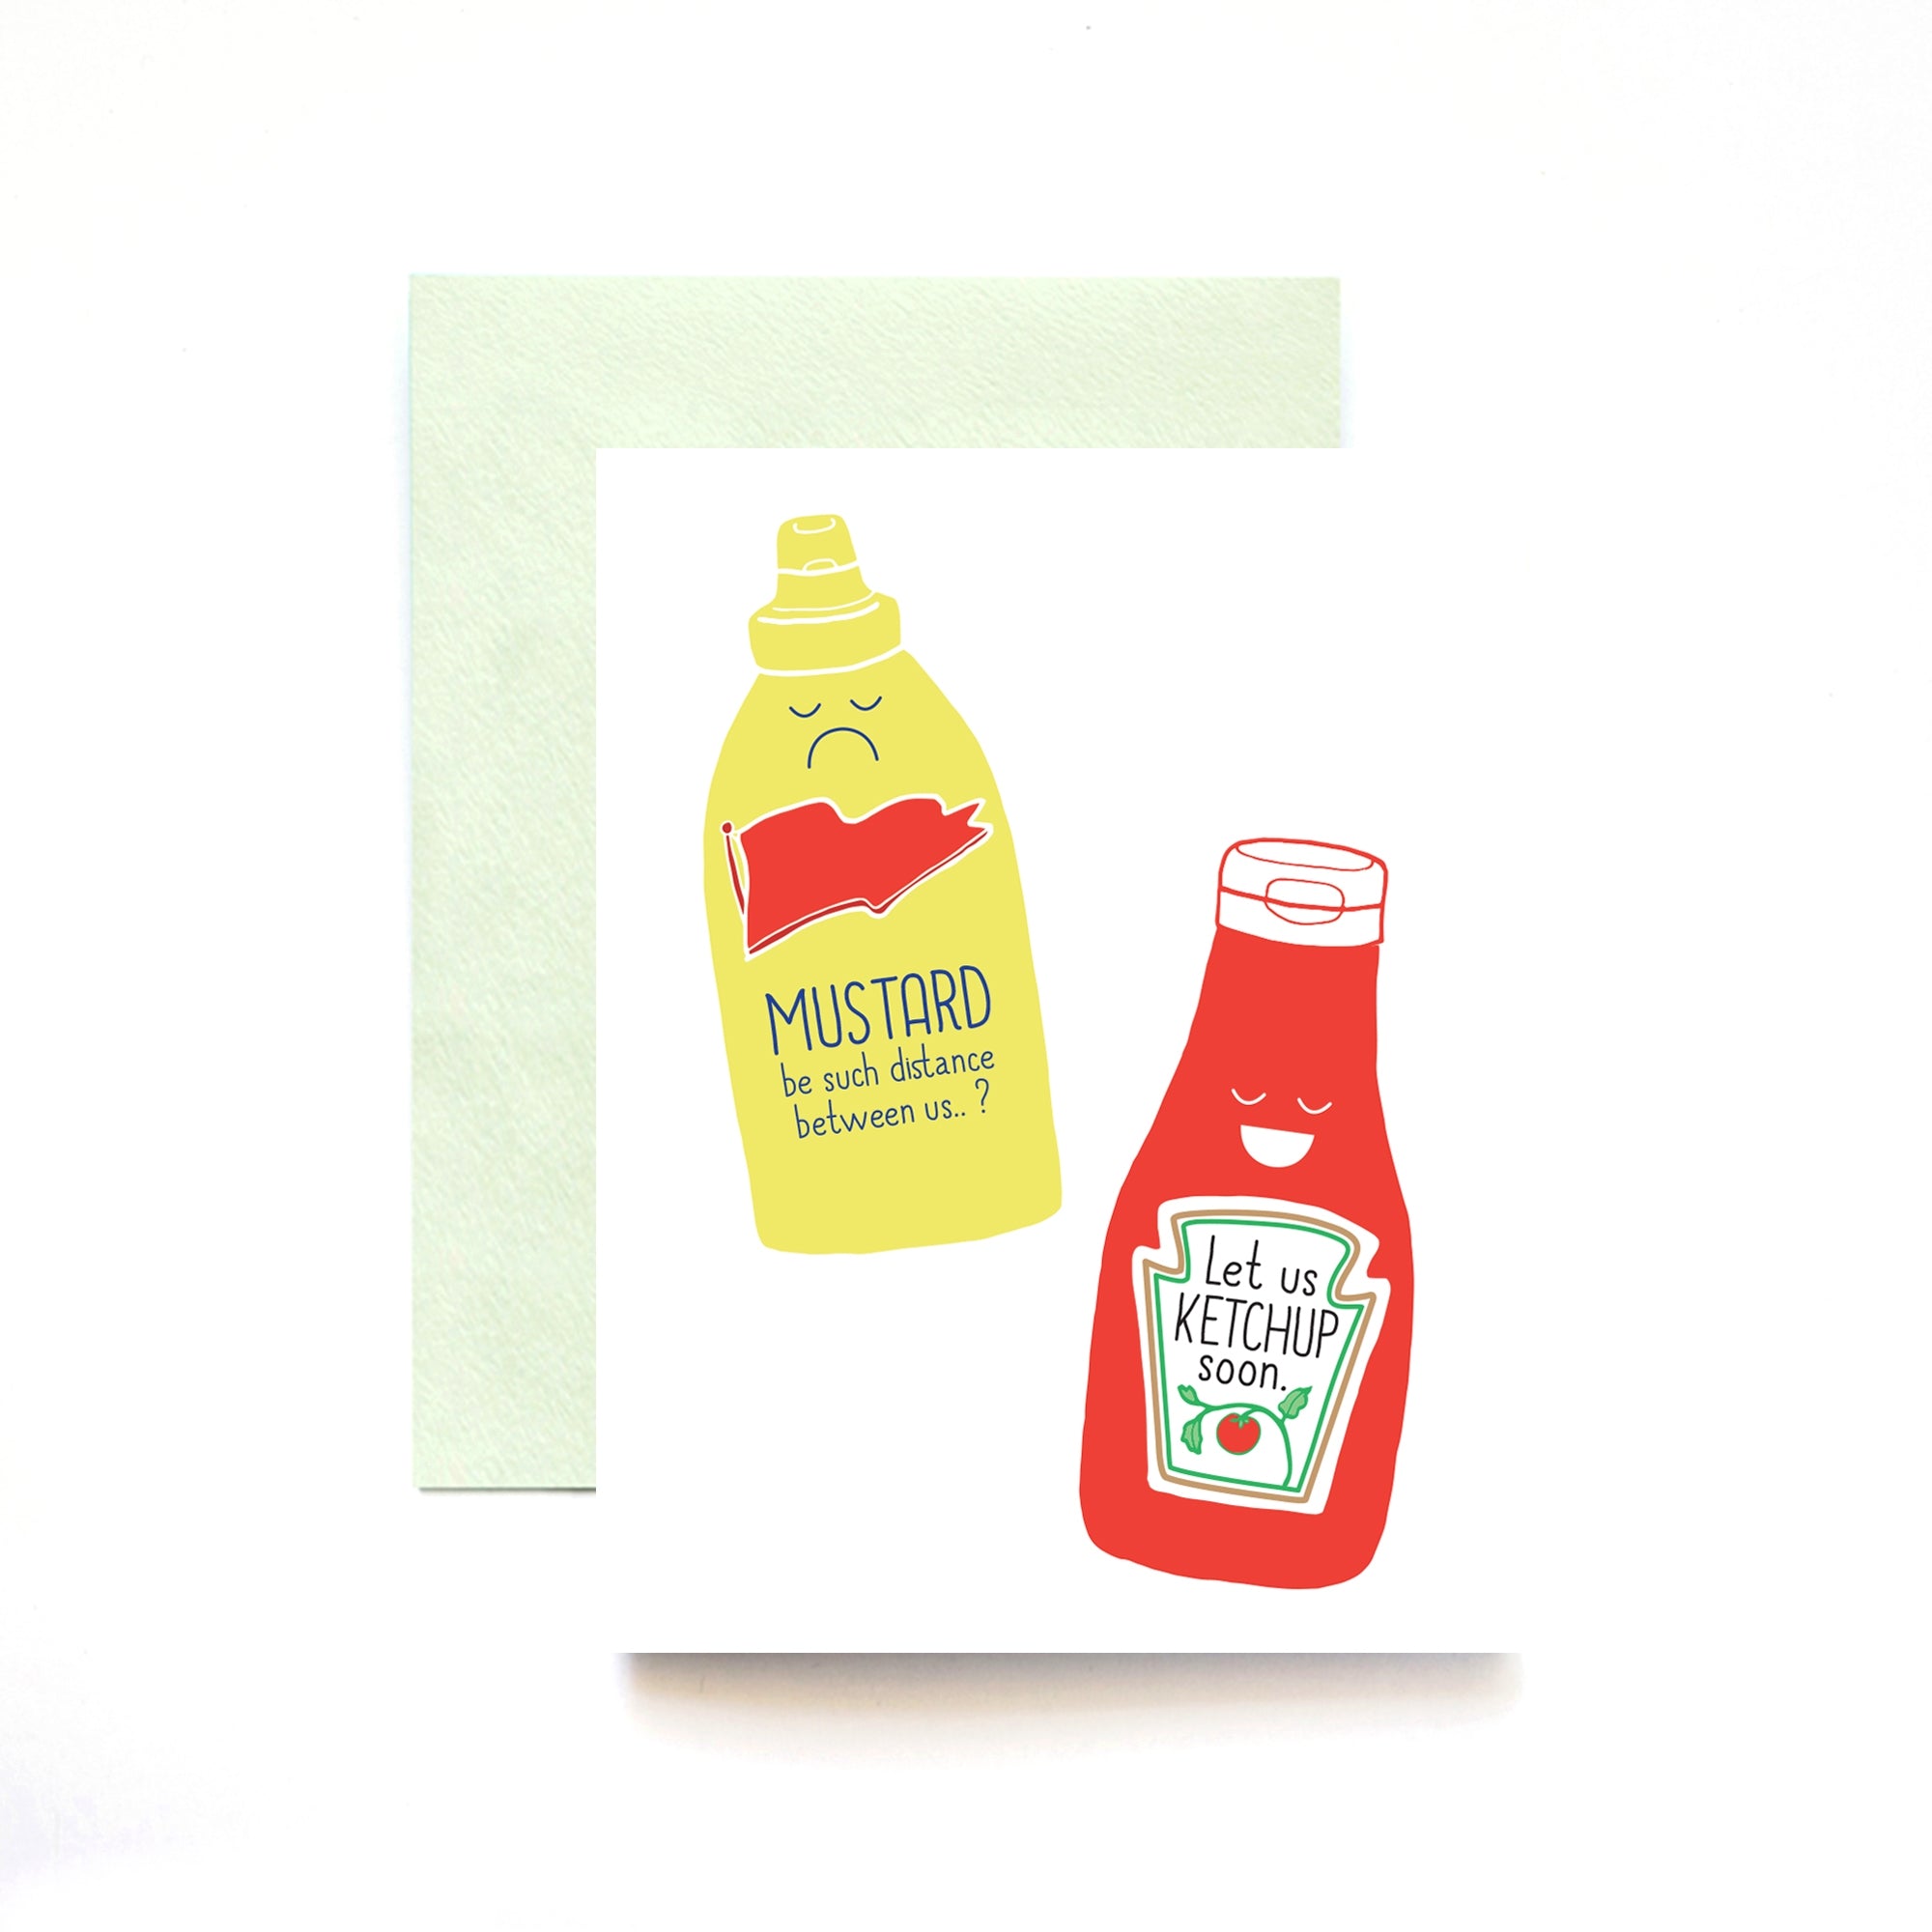 White card with black text saying, “Mustard Be Such A Distance Between us? Let’s Ketchup Soon”. Images of a bottle of mustard and bottle of ketchup. A light green envelope is included.